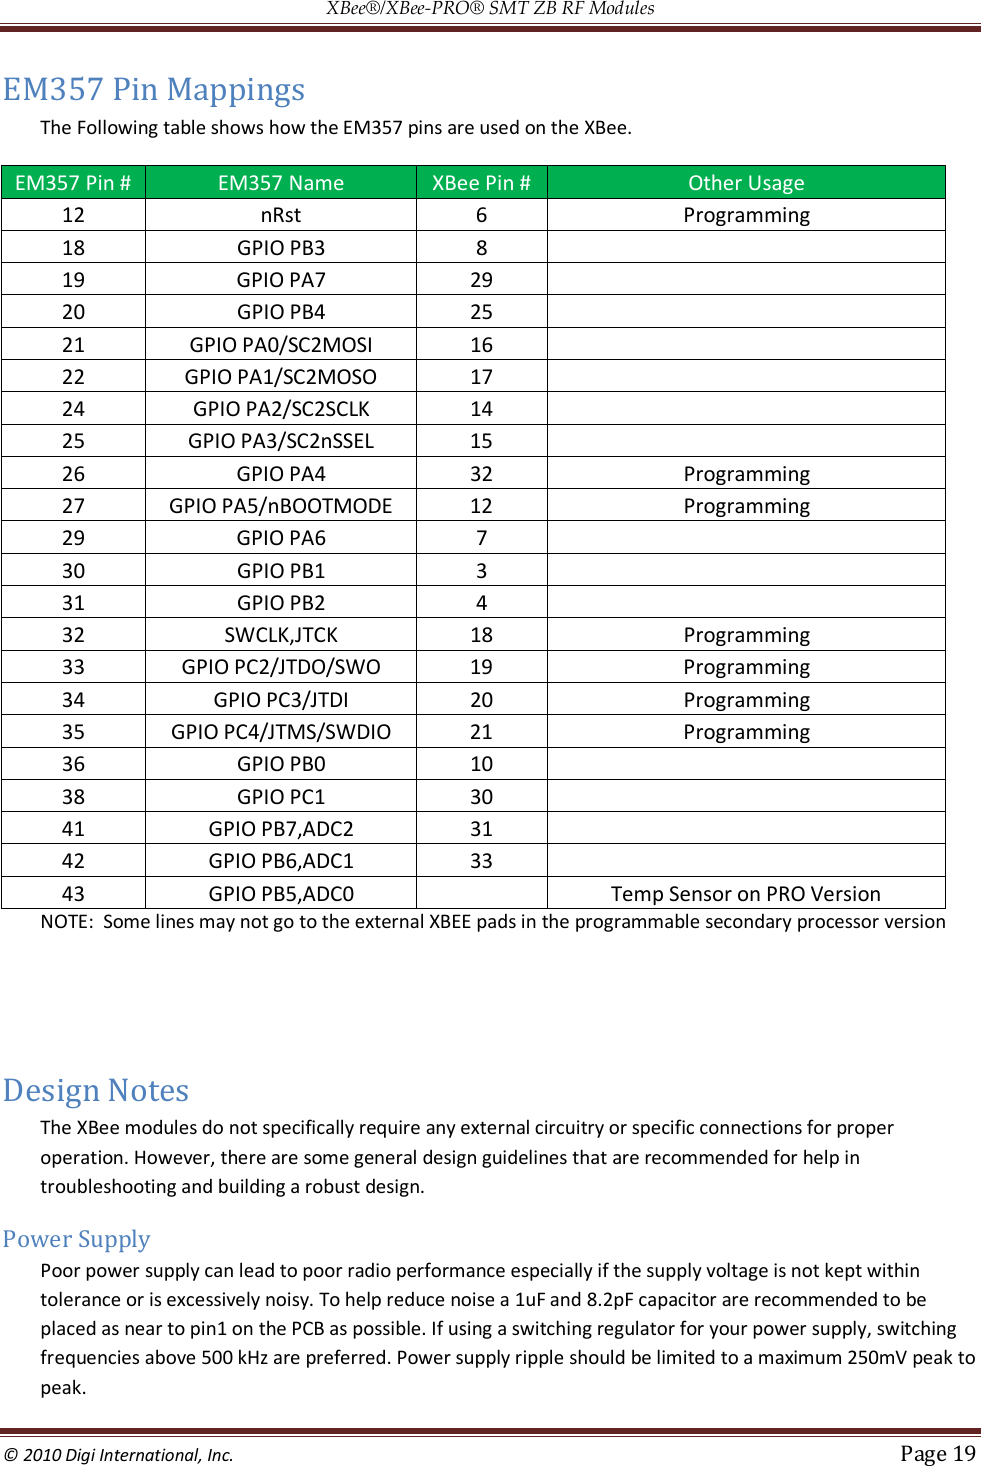 XBee®/XBee‐PRO® SMT ZB RF Modules  © 2010 Digi International, Inc.   Page 19  EM357 Pin Mappings The Following table shows how the EM357 pins are used on the XBee. EM357 Pin #  EM357 Name  XBee Pin #  Other Usage 12  nRst  6  Programming 18  GPIO PB3  8    19  GPIO PA7  29    20  GPIO PB4  25    21  GPIO PA0/SC2MOSI  16    22  GPIO PA1/SC2MOSO  17    24  GPIO PA2/SC2SCLK  14    25  GPIO PA3/SC2nSSEL  15    26  GPIO PA4  32  Programming 27  GPIO PA5/nBOOTMODE  12  Programming 29  GPIO PA6  7    30  GPIO PB1  3    31  GPIO PB2  4    32  SWCLK,JTCK  18  Programming 33  GPIO PC2/JTDO/SWO  19  Programming 34  GPIO PC3/JTDI  20  Programming 35  GPIO PC4/JTMS/SWDIO  21  Programming 36  GPIO PB0  10    38  GPIO PC1  30    41  GPIO PB7,ADC2  31    42  GPIO PB6,ADC1  33    43  GPIO PB5,ADC0     Temp Sensor on PRO Version NOTE:  Some lines may not go to the external XBEE pads in the programmable secondary processor version   Design Notes The XBee modules do not specifically require any external circuitry or specific connections for proper operation. However, there are some general design guidelines that are recommended for help in troubleshooting and building a robust design. Power Supply Poor power supply can lead to poor radio performance especially if the supply voltage is not kept within tolerance or is excessively noisy. To help reduce noise a 1uF and 8.2pF capacitor are recommended to be placed as near to pin1 on the PCB as possible. If using a switching regulator for your power supply, switching frequencies above 500 kHz are preferred. Power supply ripple should be limited to a maximum 250mV peak to peak.  